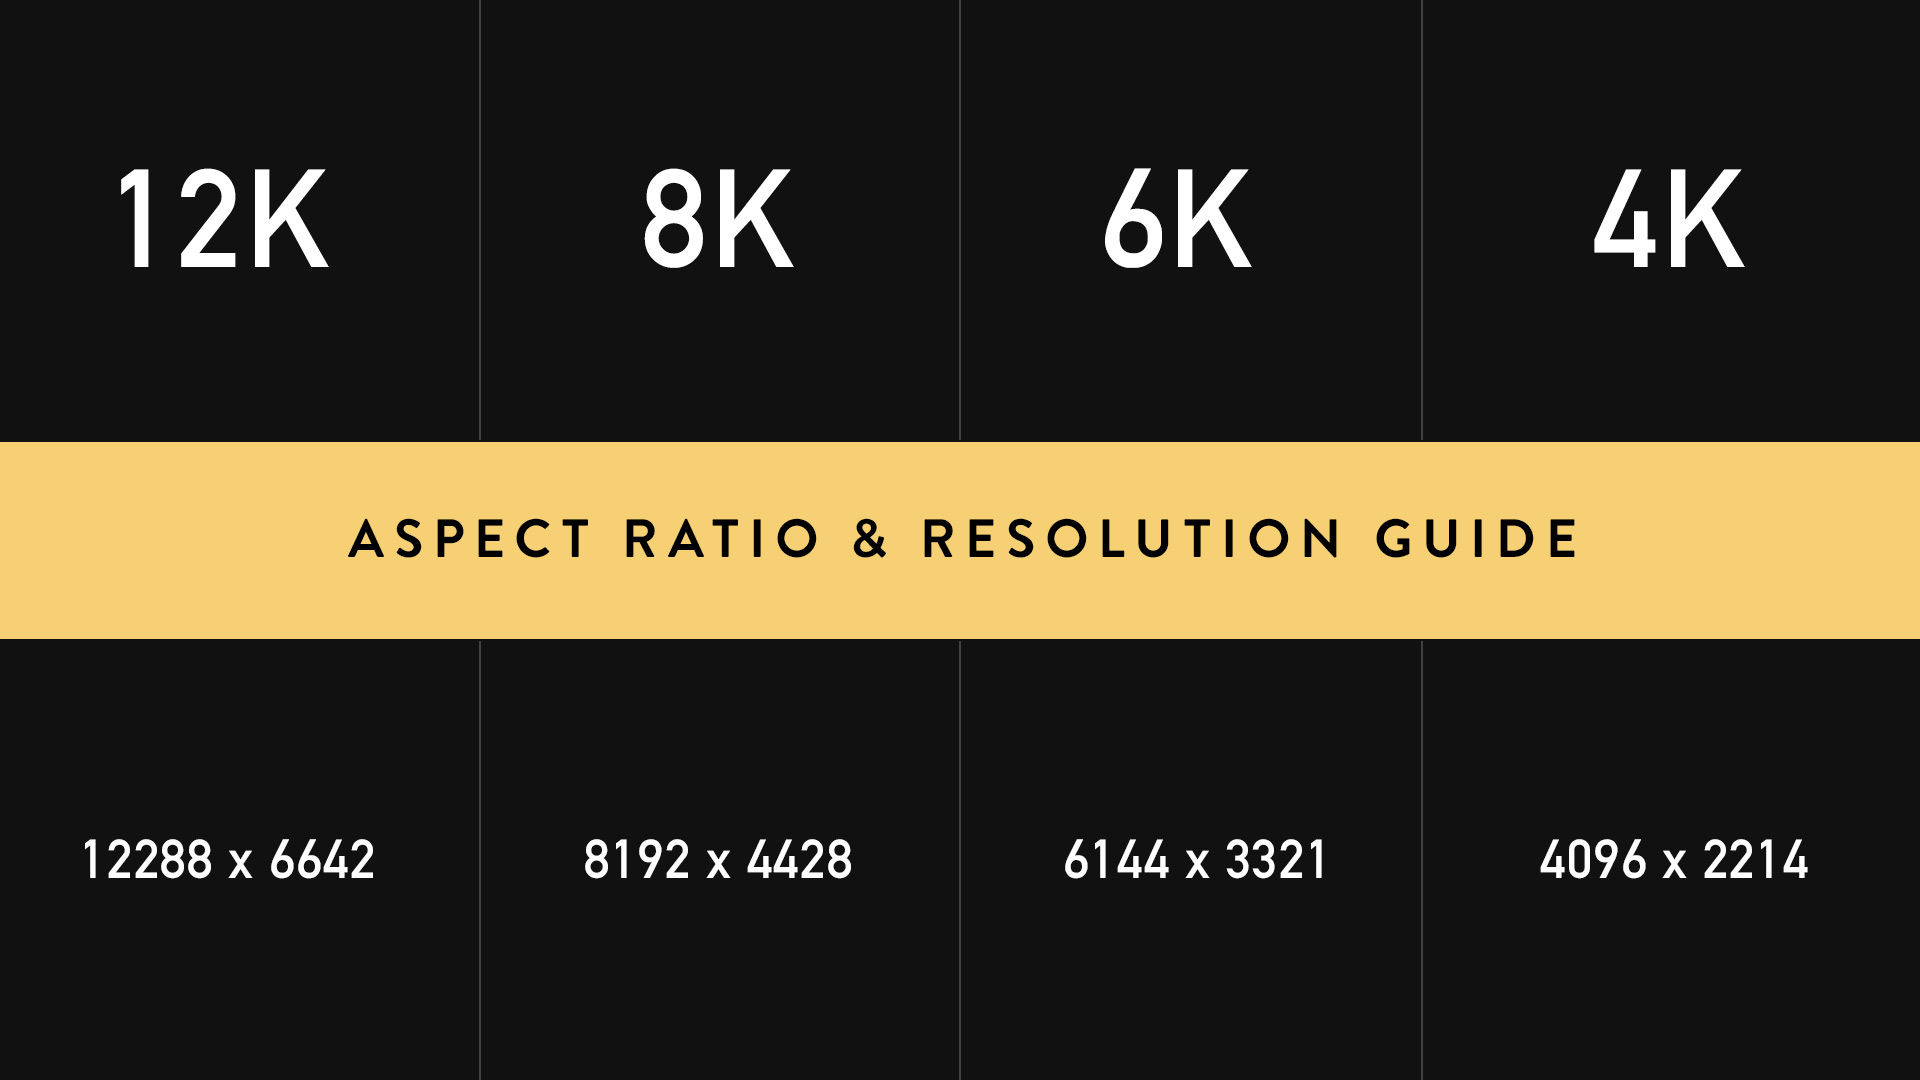 Gebeurt Taiko buik Medaille The Definitive Aspect Ratio & Resolution Guide For Video: 2K, 4K, 6K, 8K &  Every Other Major Format - Noam Kroll